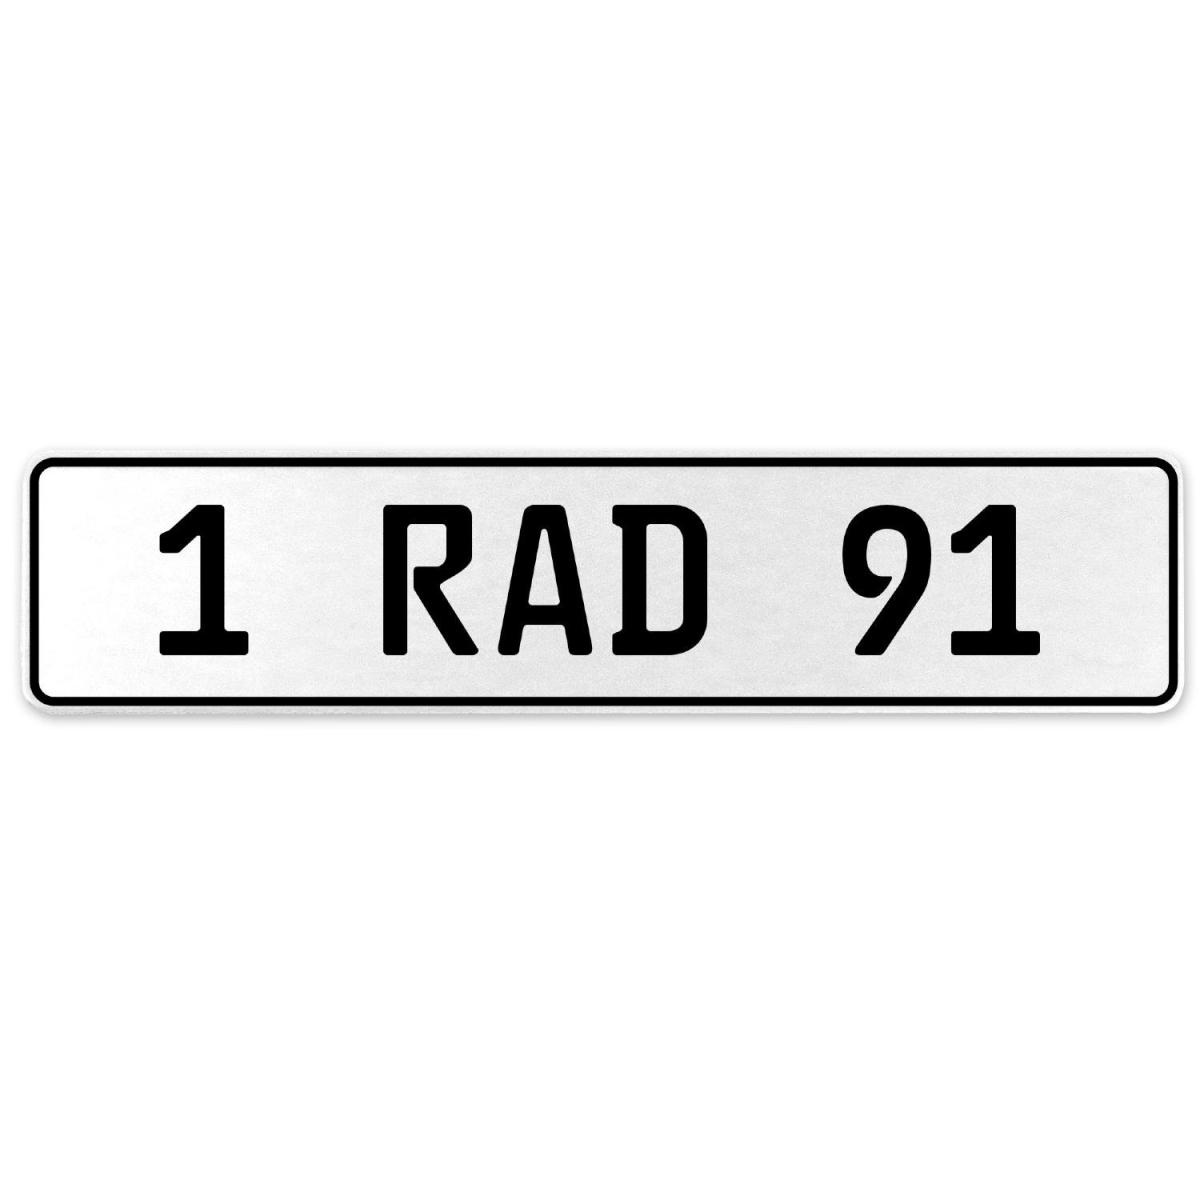 554094 1 Rad 91 - White Aluminum Street Sign Mancave Euro Plate Name Door Sign Wall